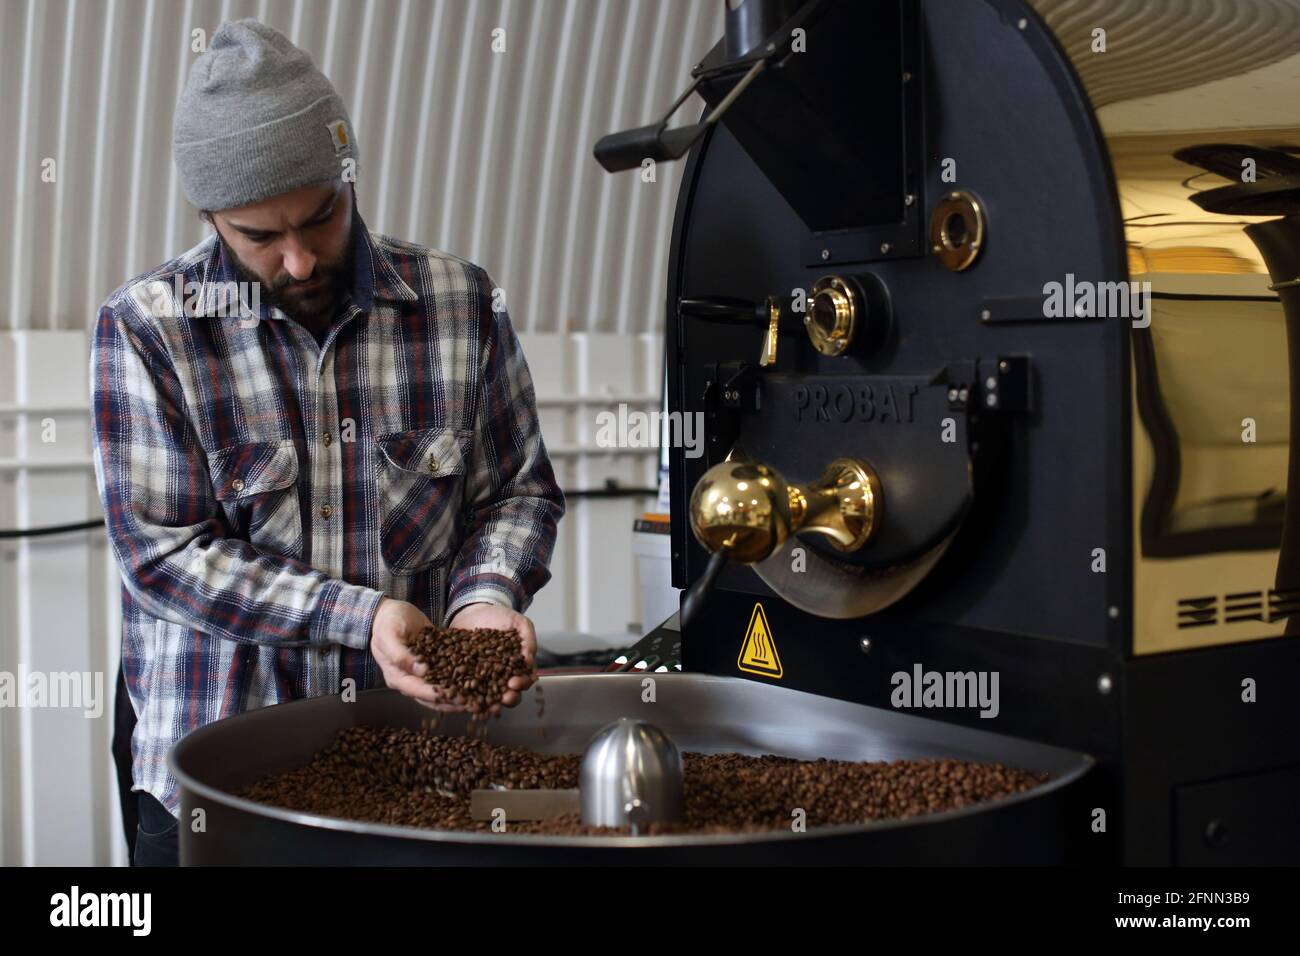 Man holding roasted coffee beans , Man's hand holding coffee beans from roaster Stock Photo